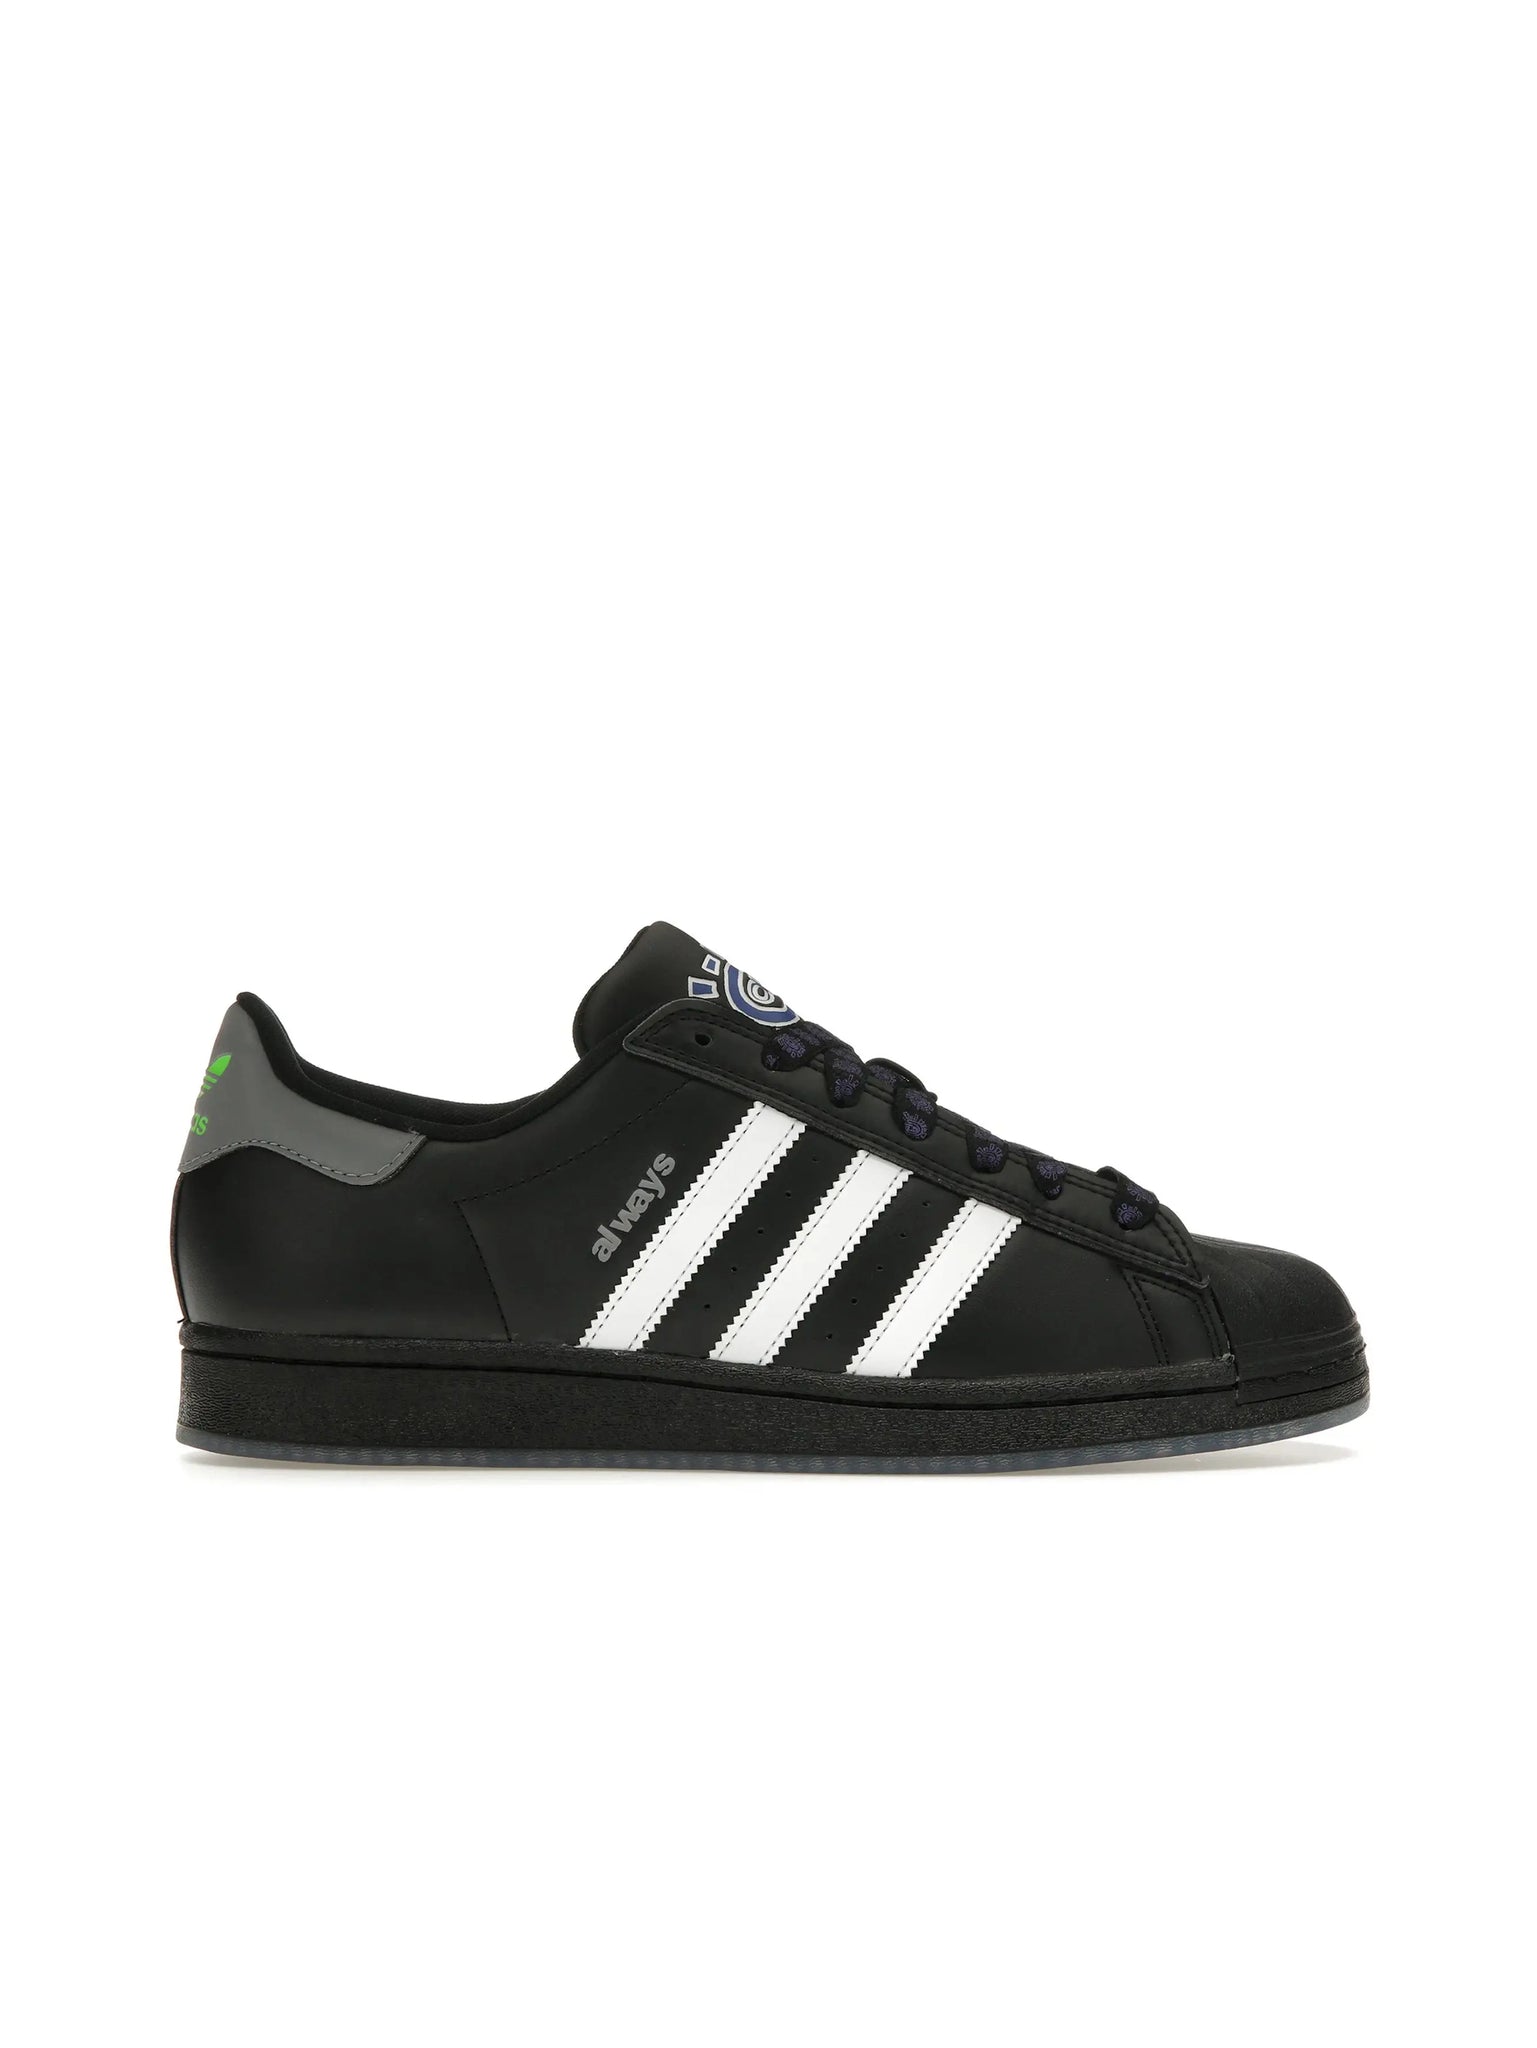 adidas Superstar ADV Always Core Black in Auckland, New Zealand - Shop name